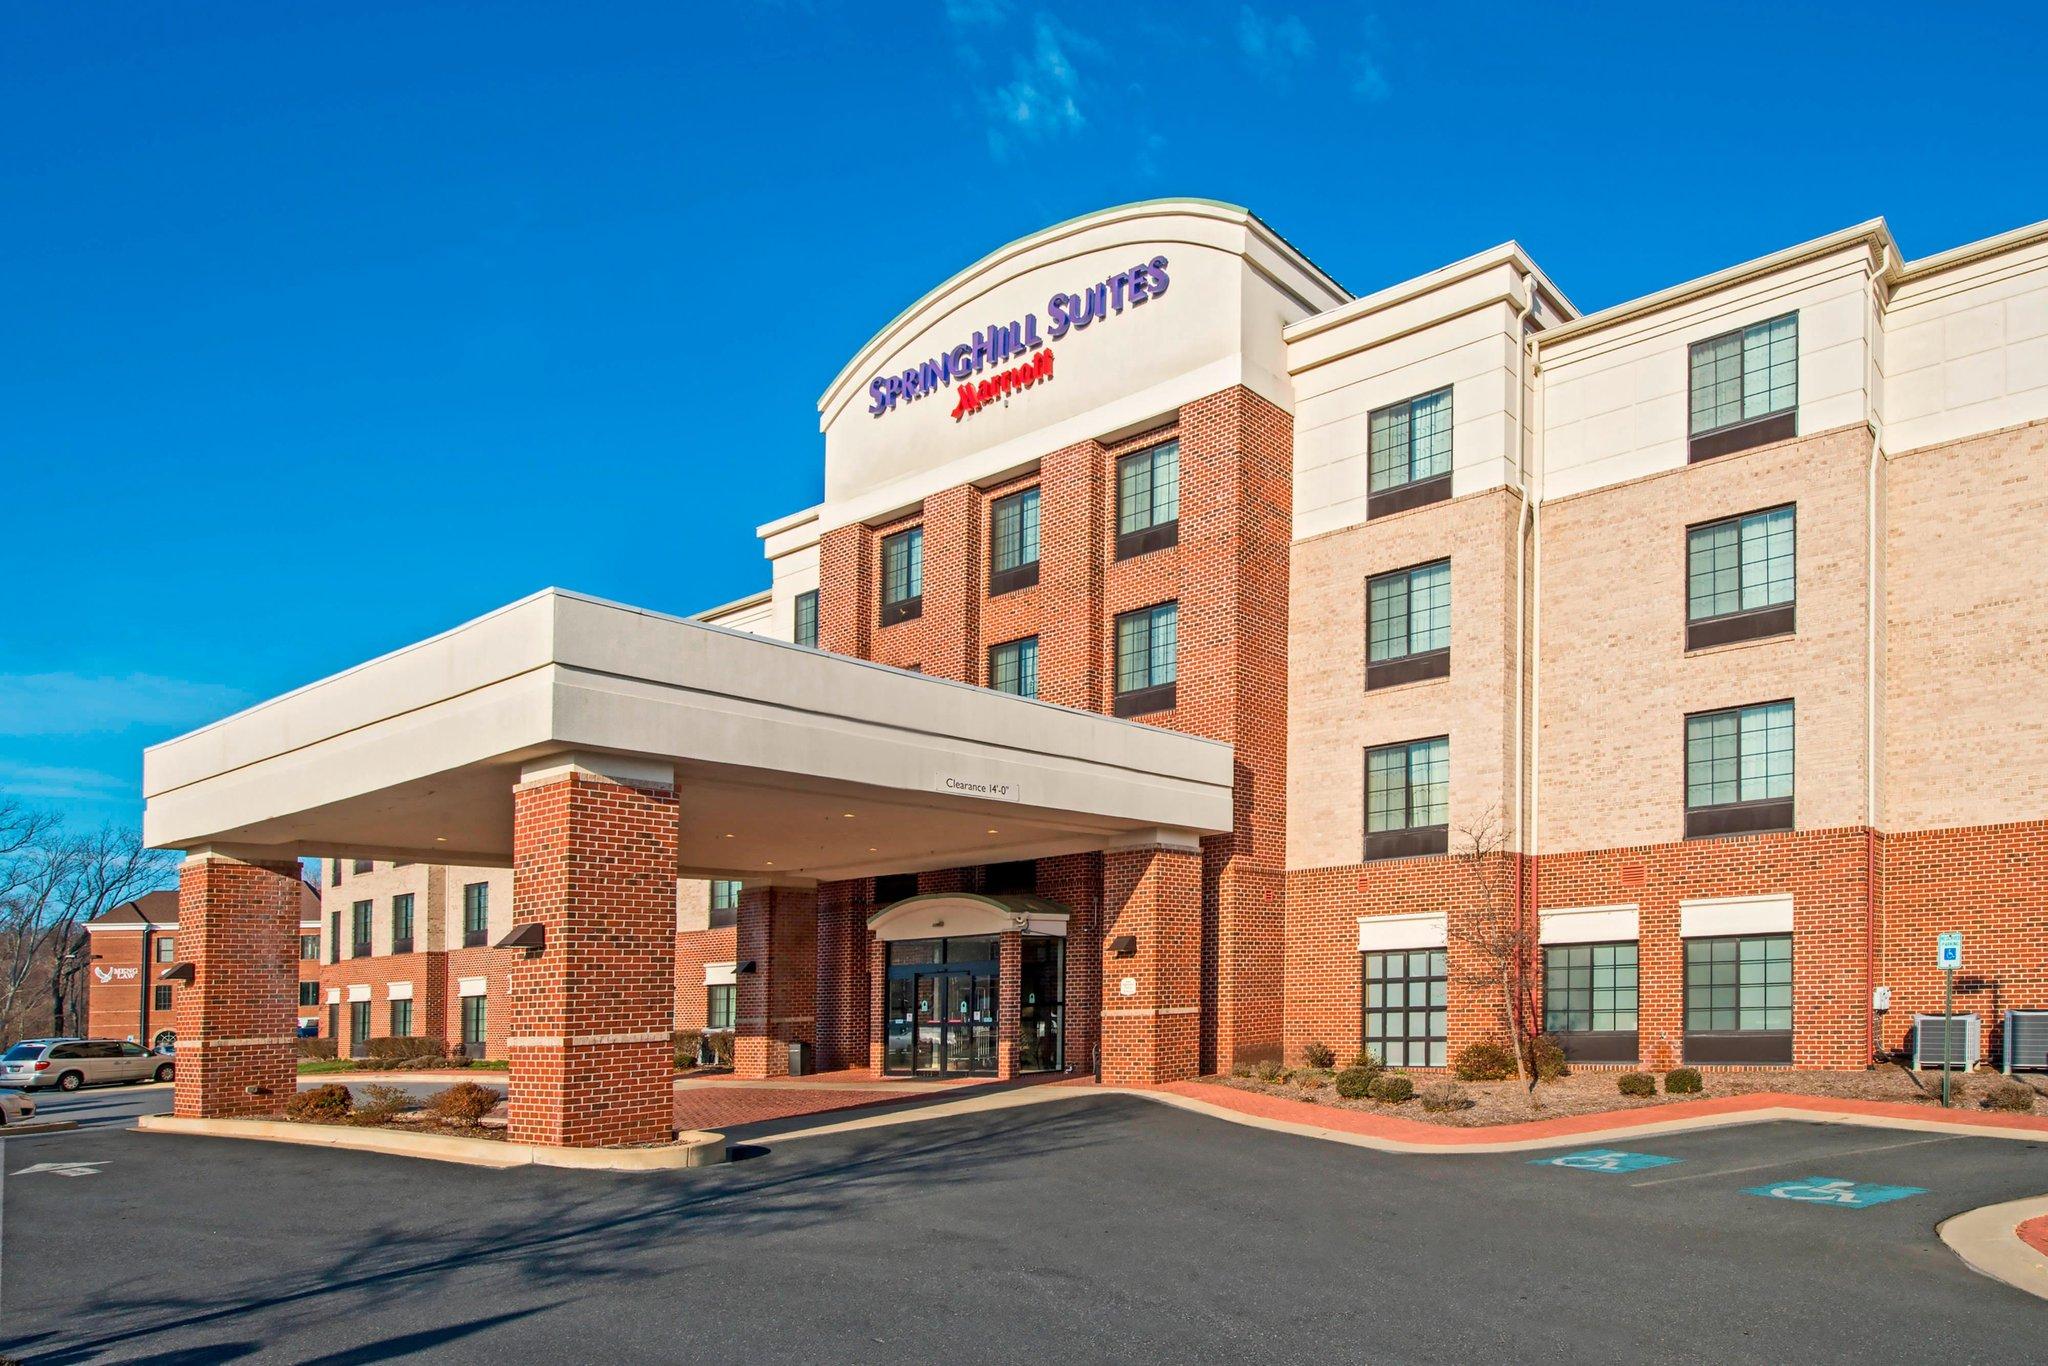 SpringHill Suites Prince Frederick in Prince Frederick, MD